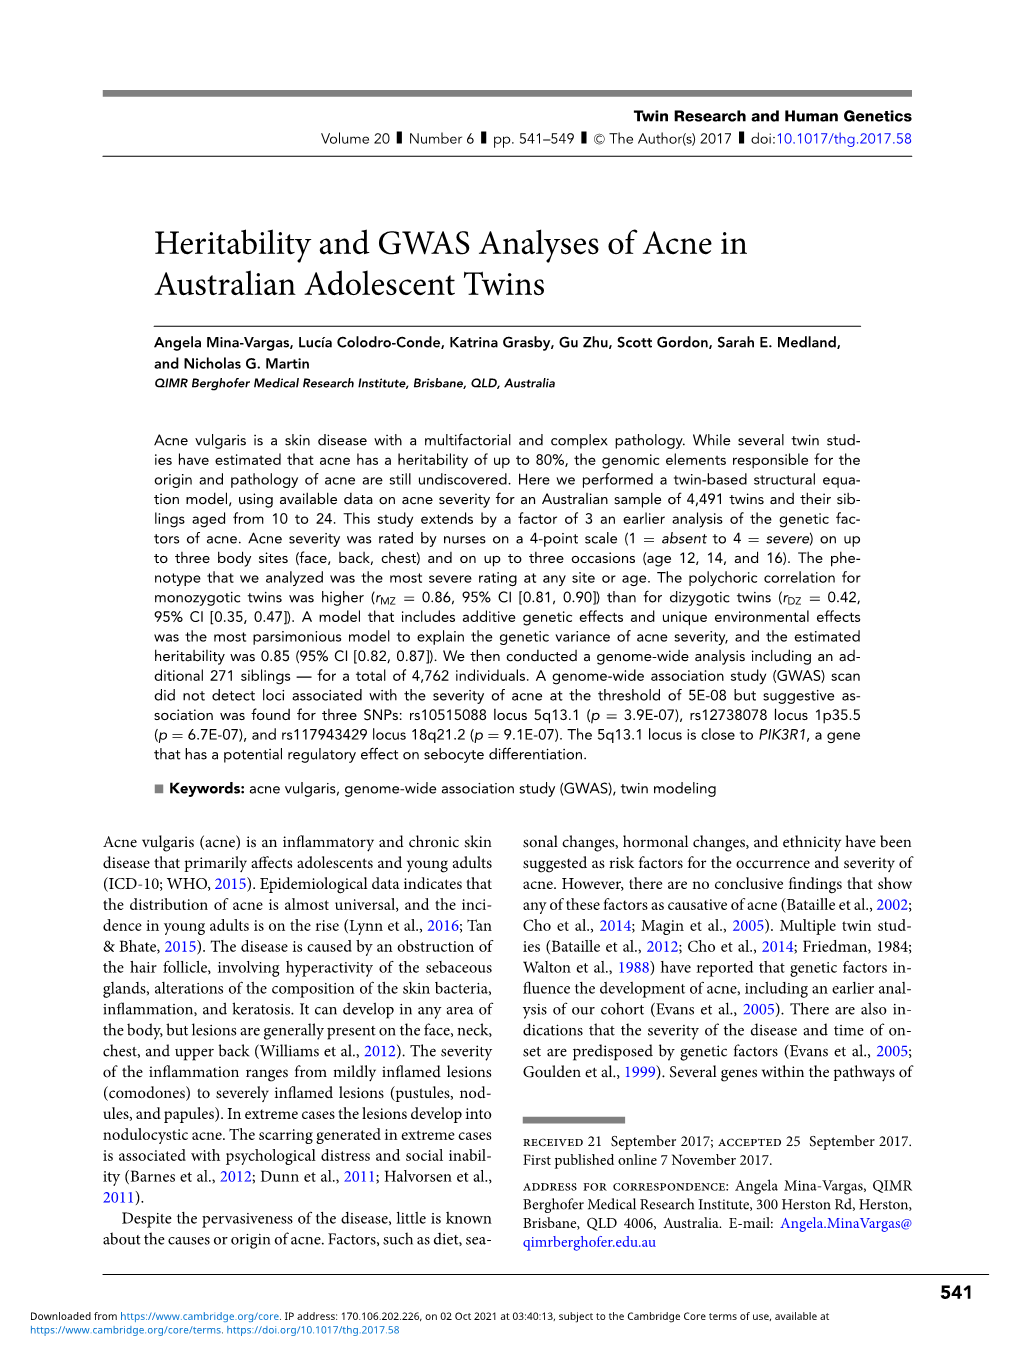 Heritability and GWAS Analyses of Acne in Australian Adolescent Twins